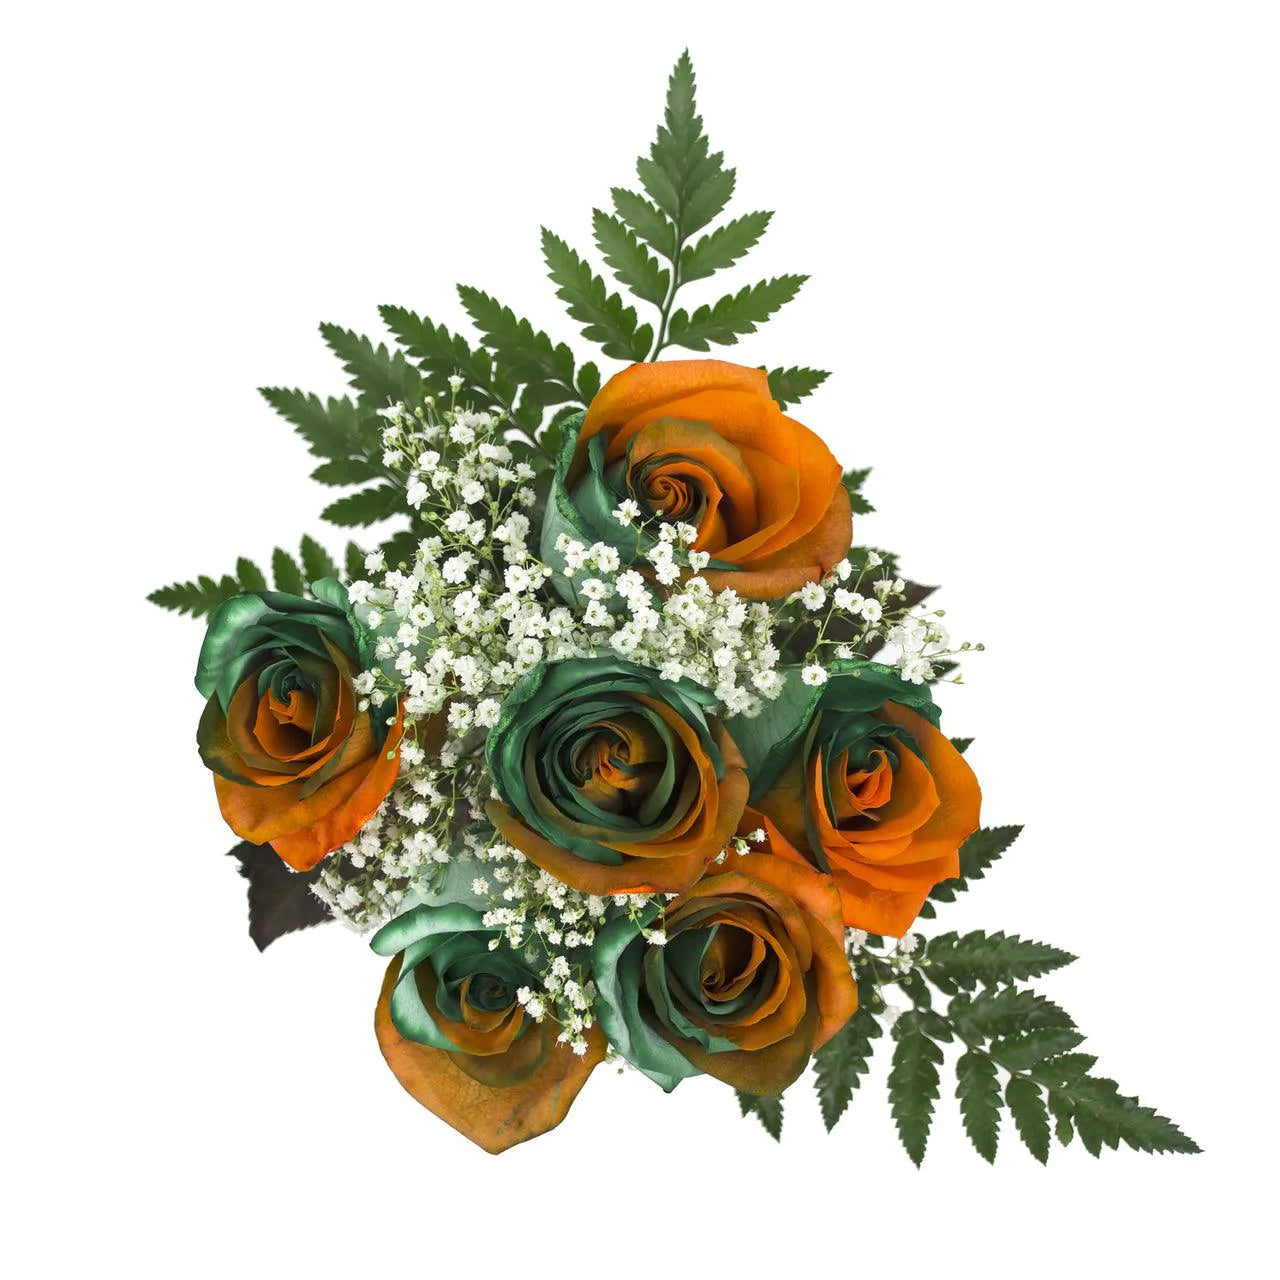 Green and Orange dyed bouquets 6-stem - 8